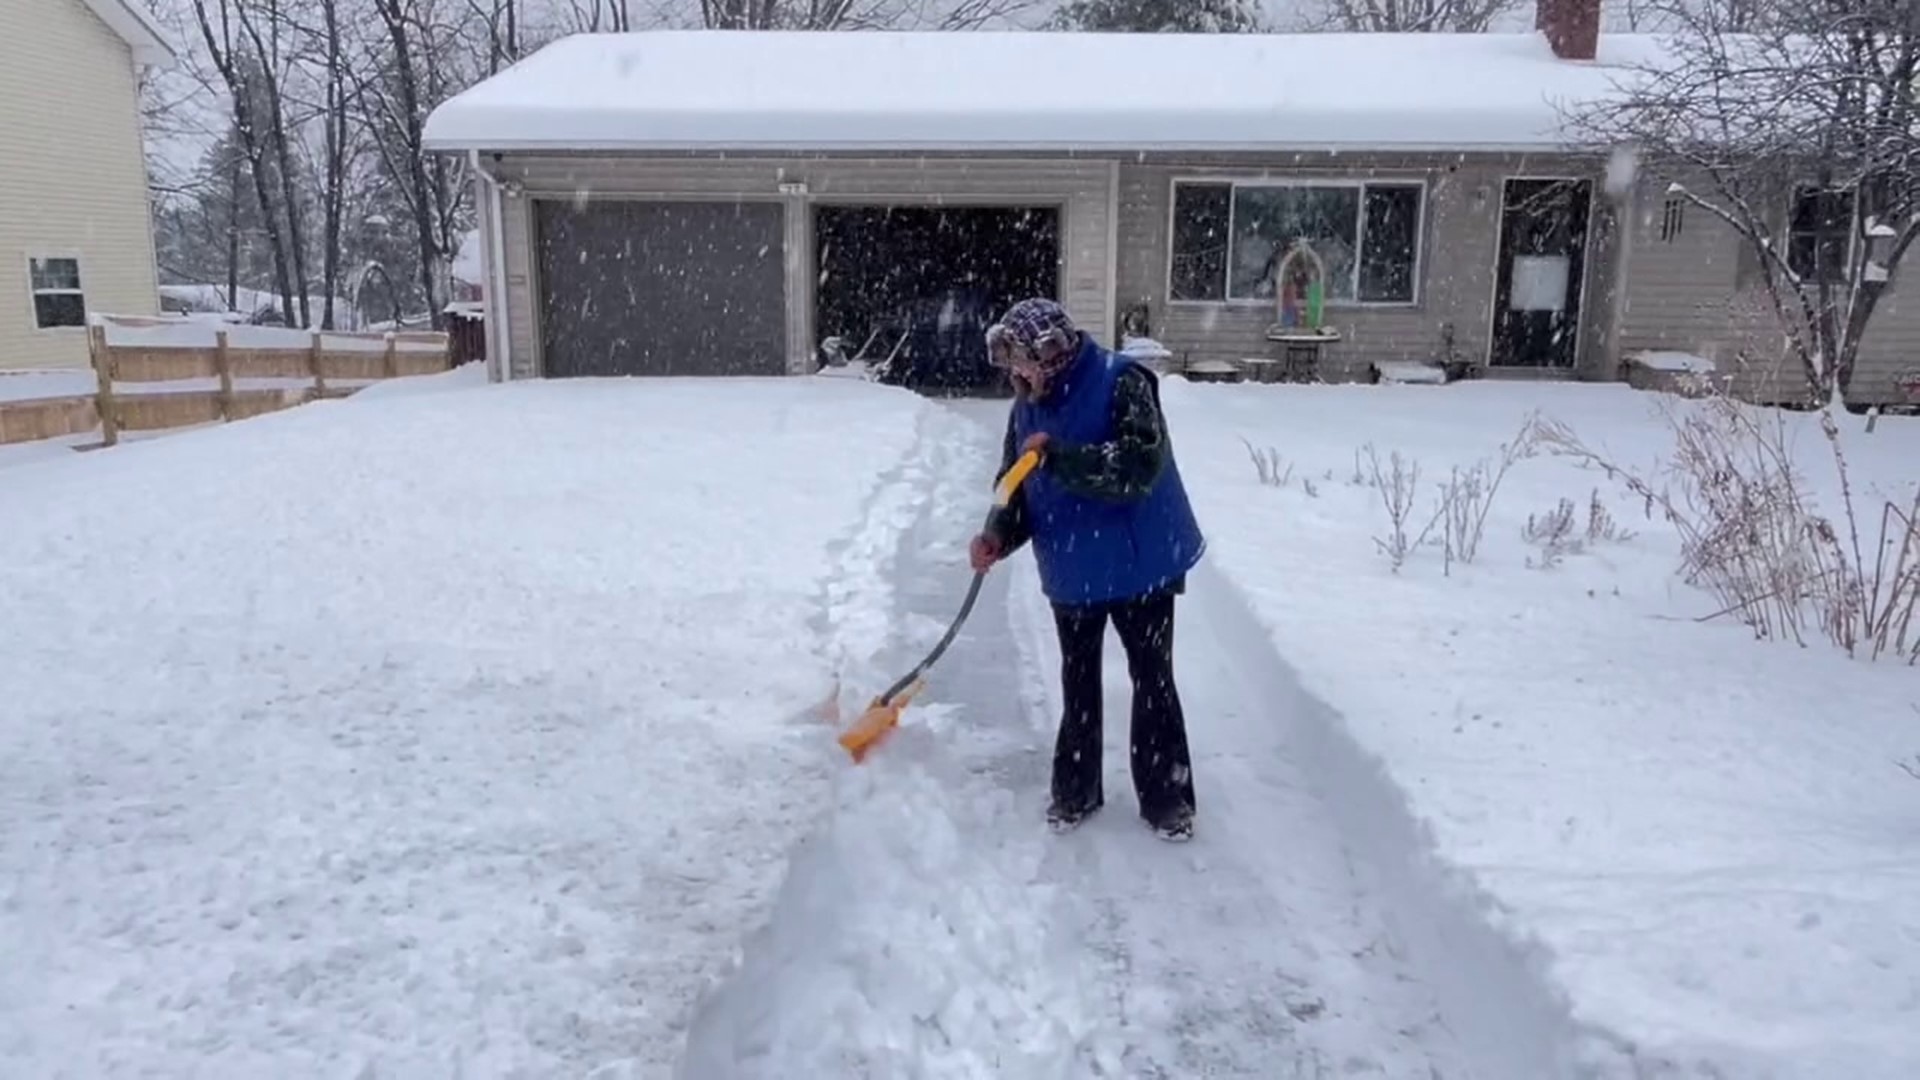 Cleaning up and clearing out, is how most neighbors in Mount Pocono spent their Sunday after nearly a foot of snow in parts of Monroe County.